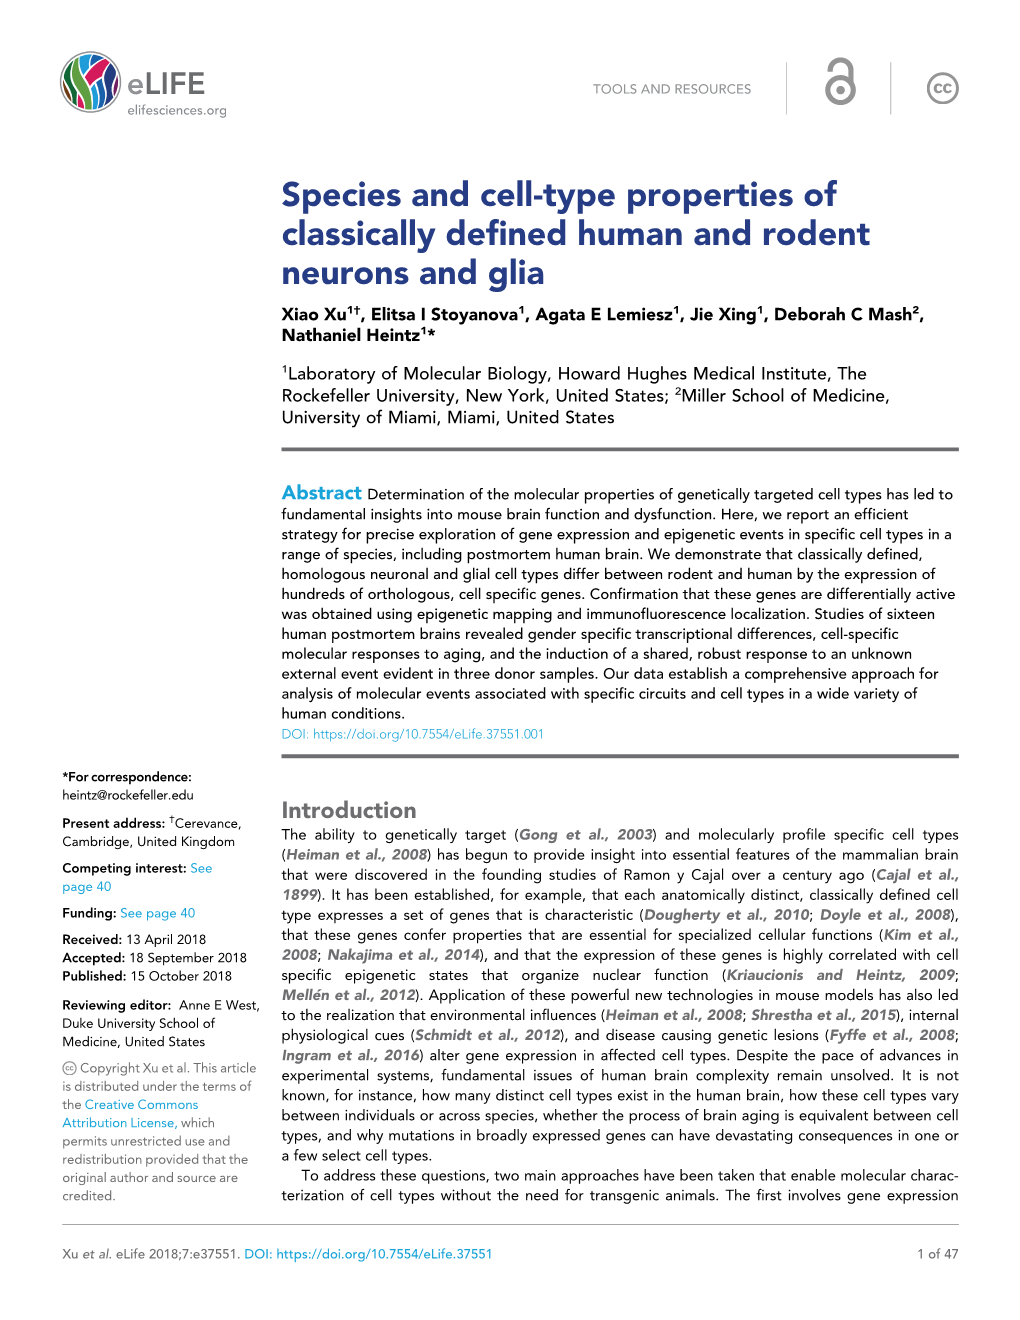 Species and Cell-Type Properties of Classically Defined Human And